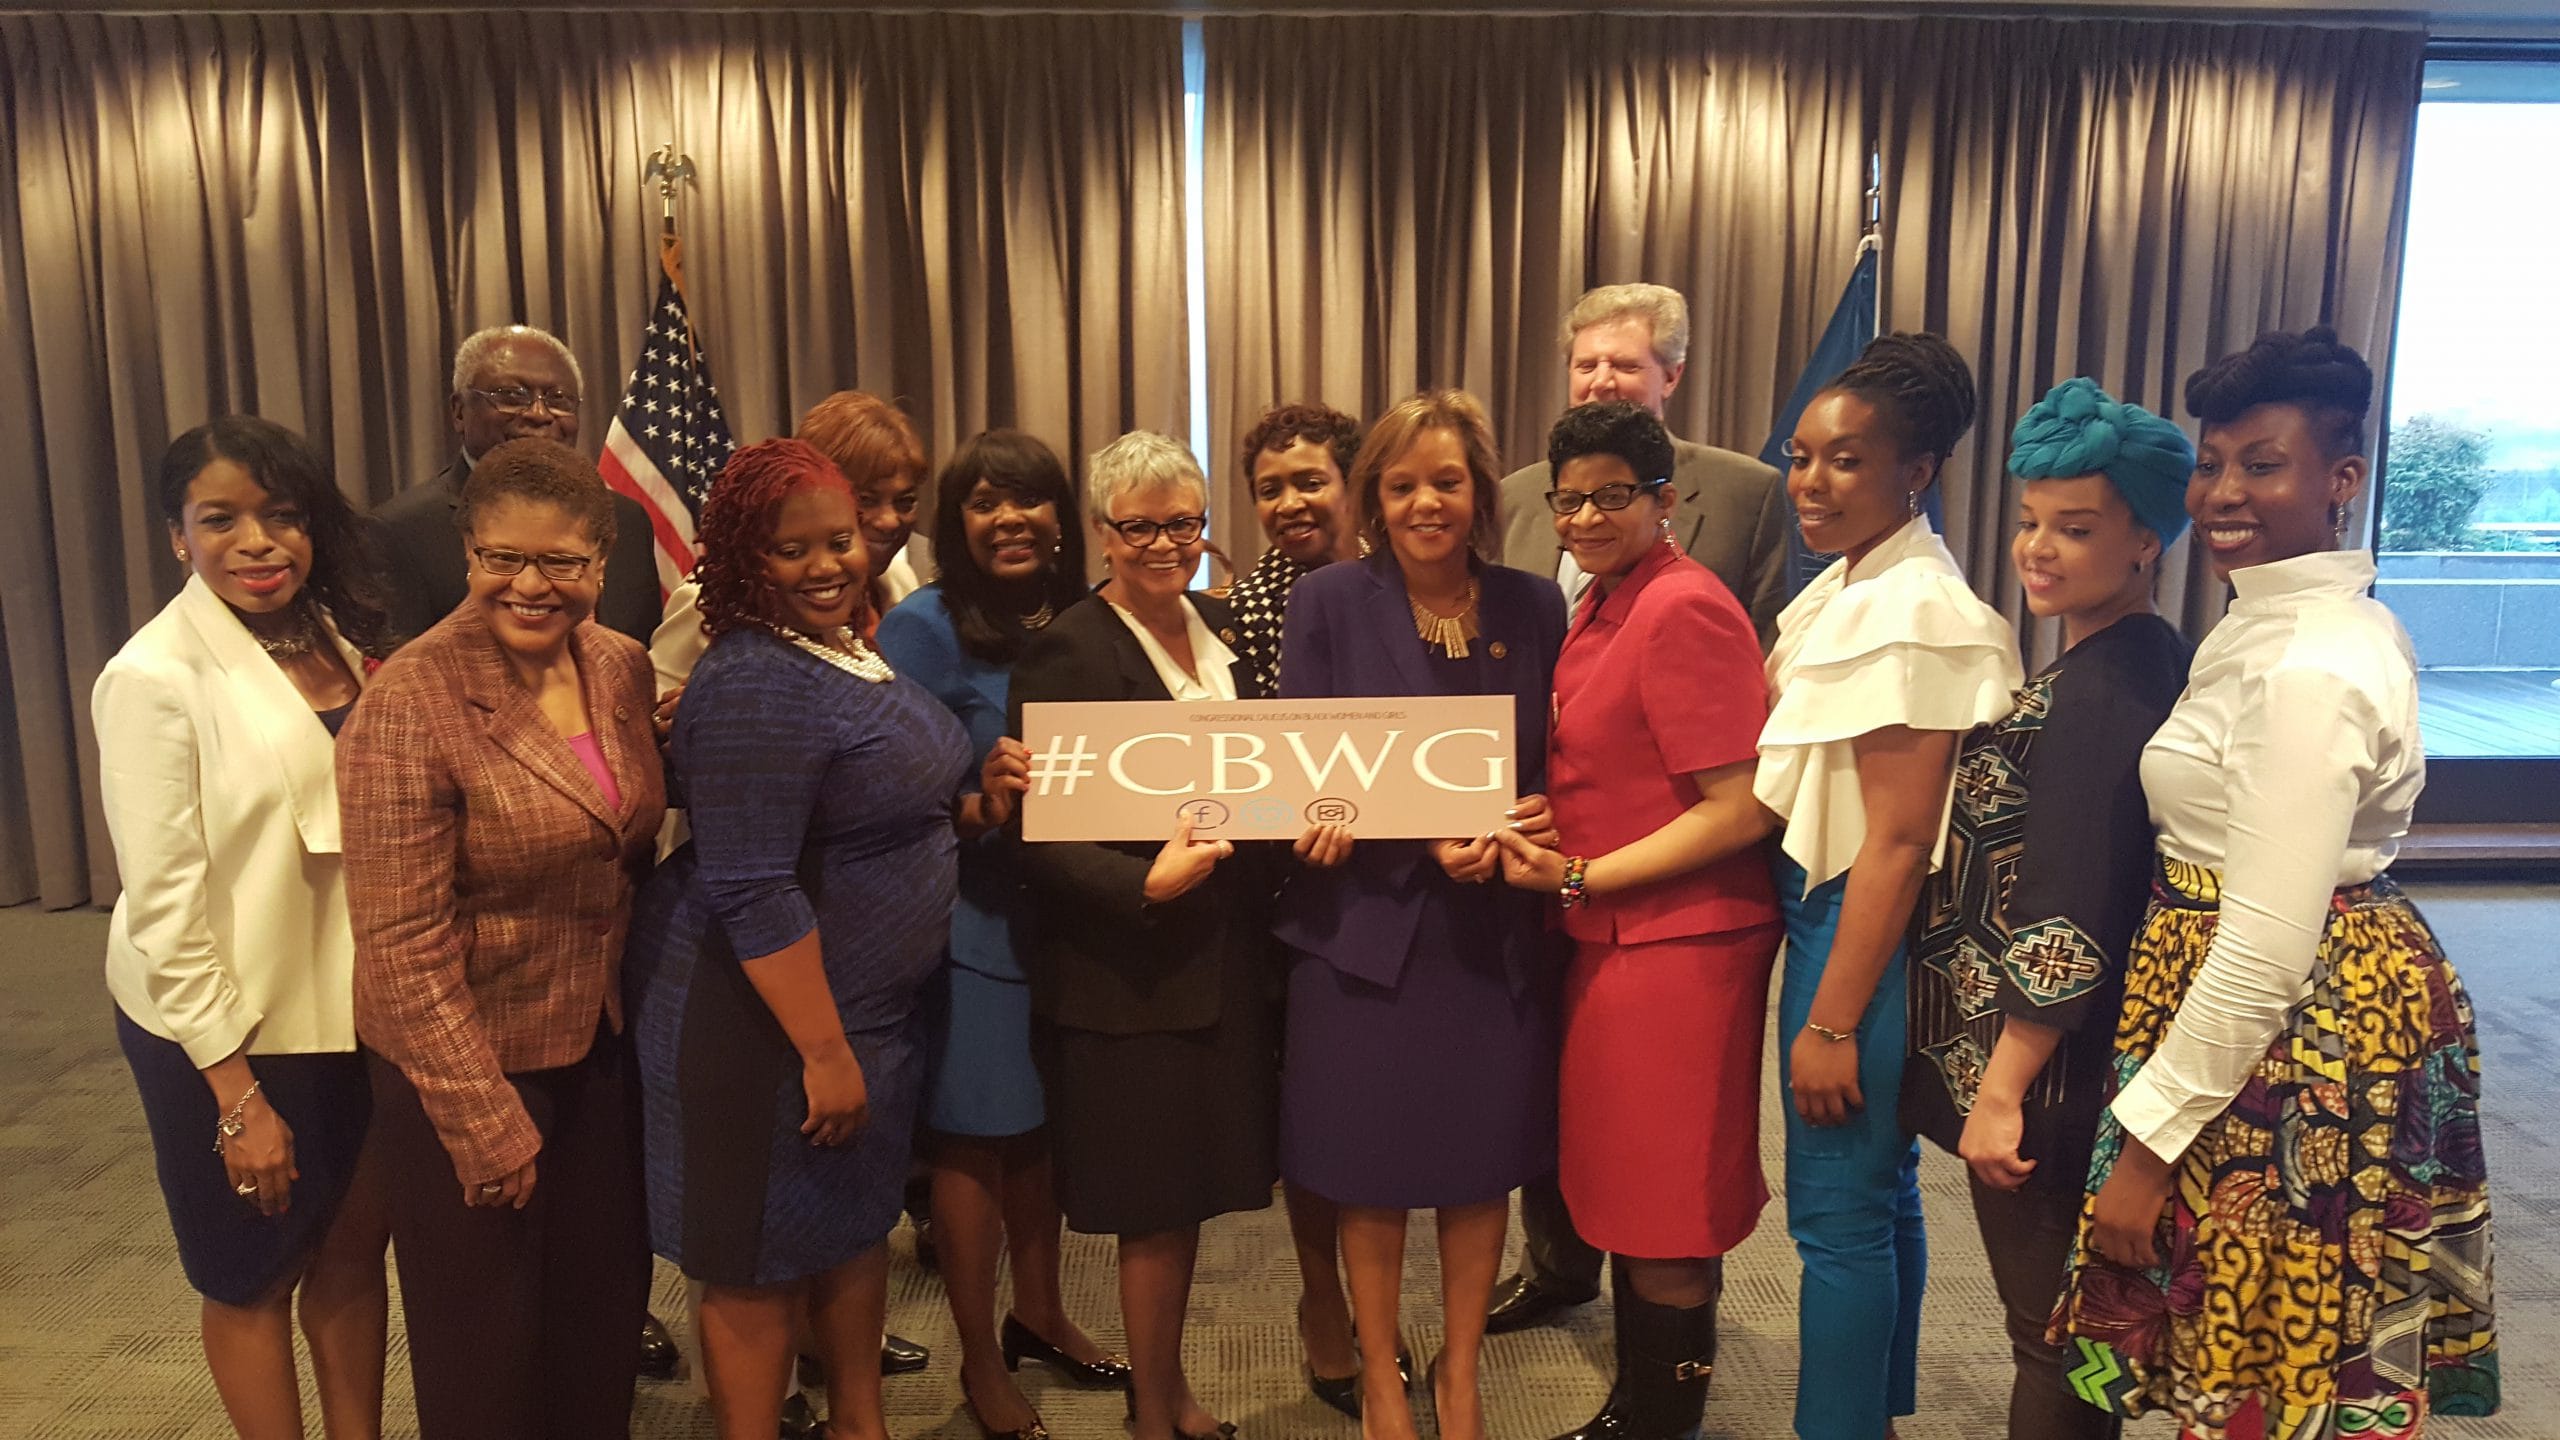 The Congressional Caucus on Black Women and Girls